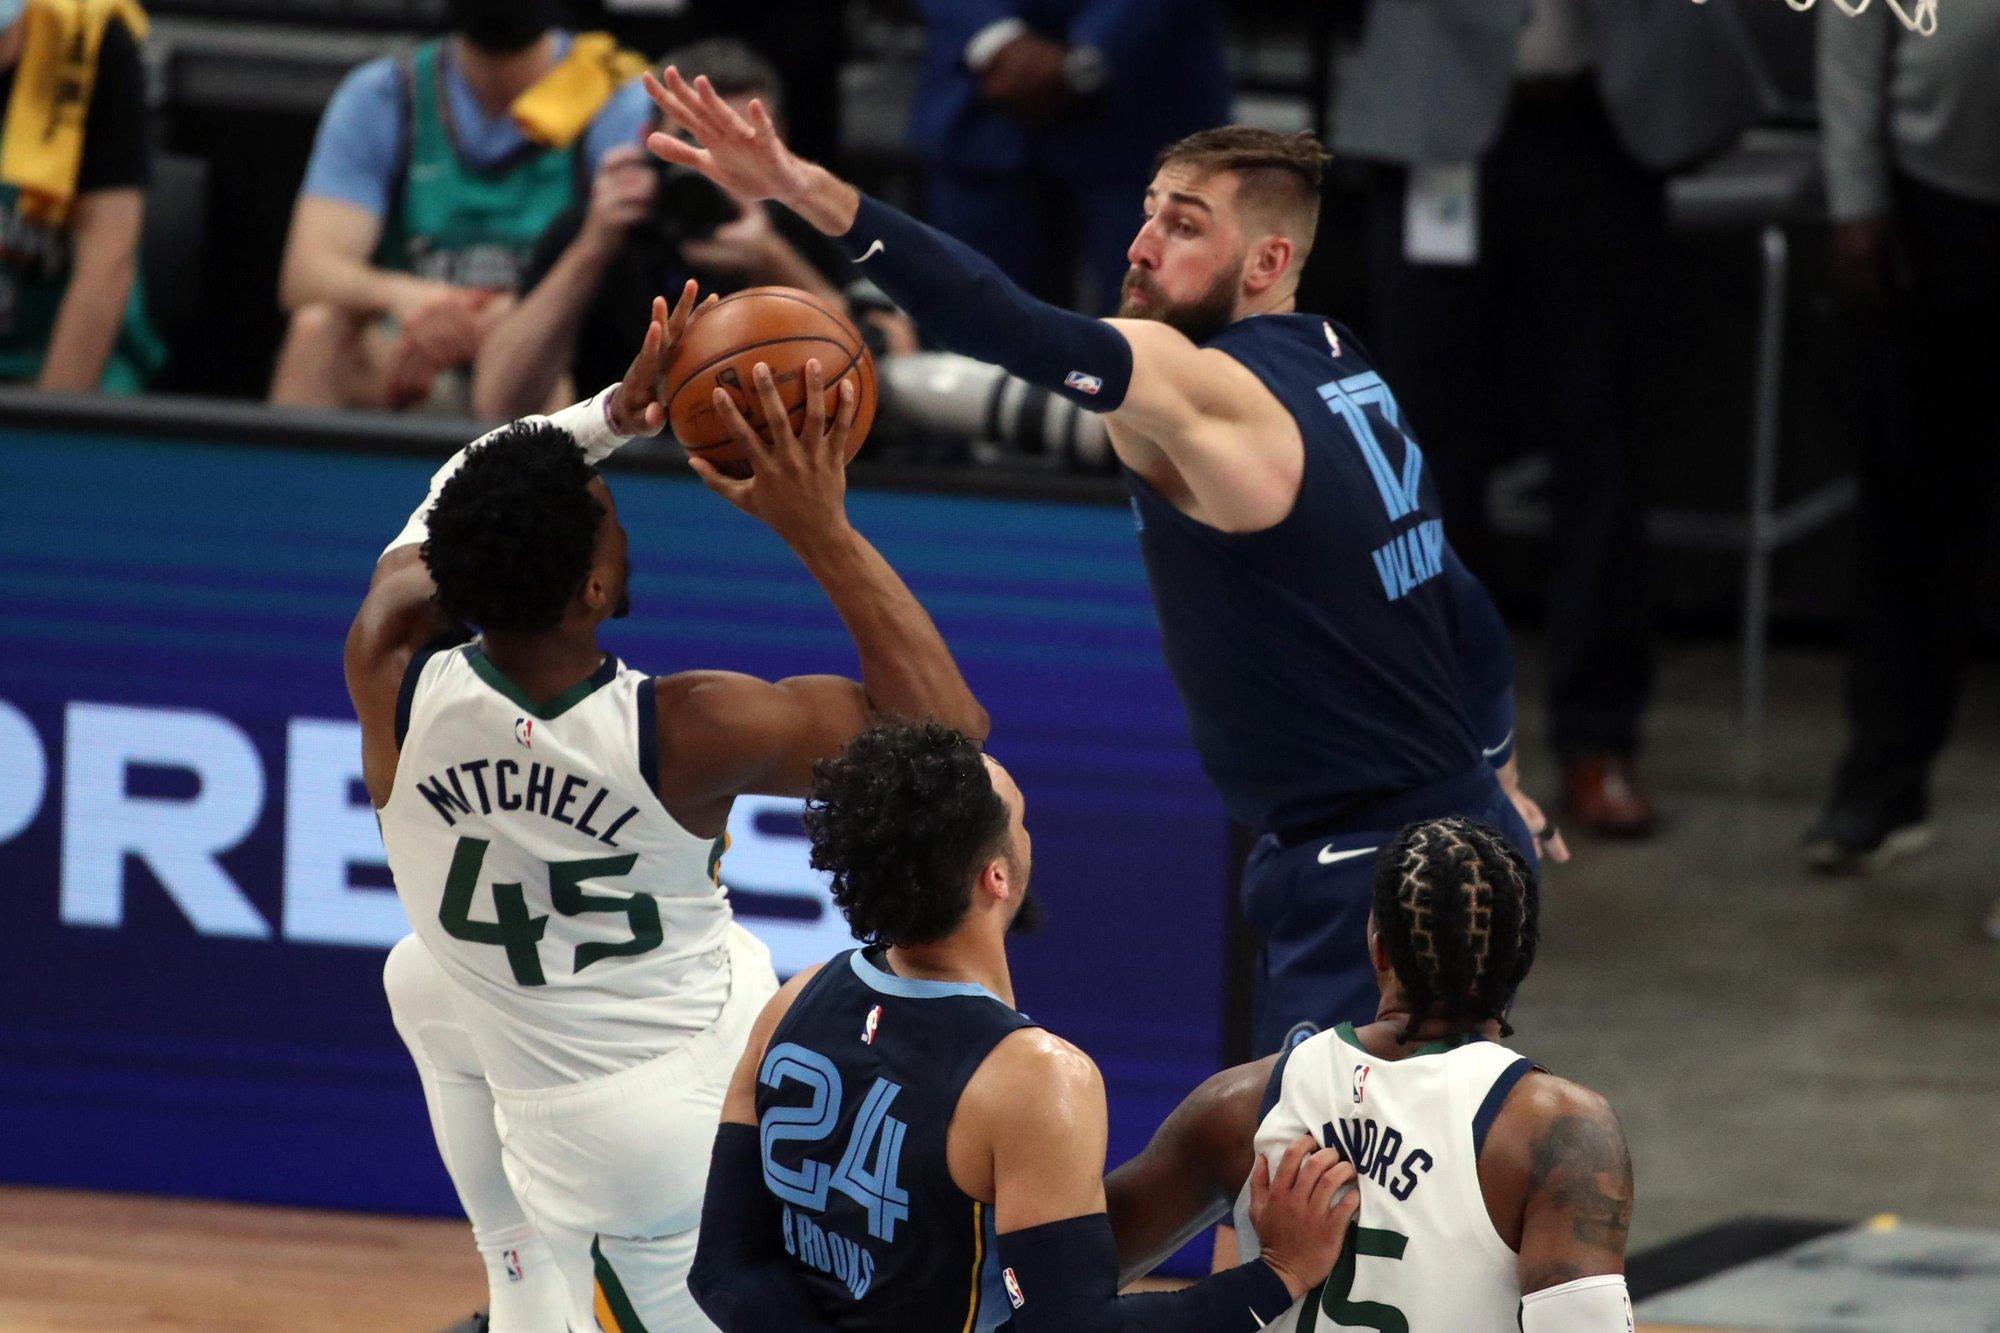 Grizzlies vs Jazz Game 5 Preview: Grizzlies Won’t Go Down Without a Fight, But Jazz Set to Stroll Into the Second Round